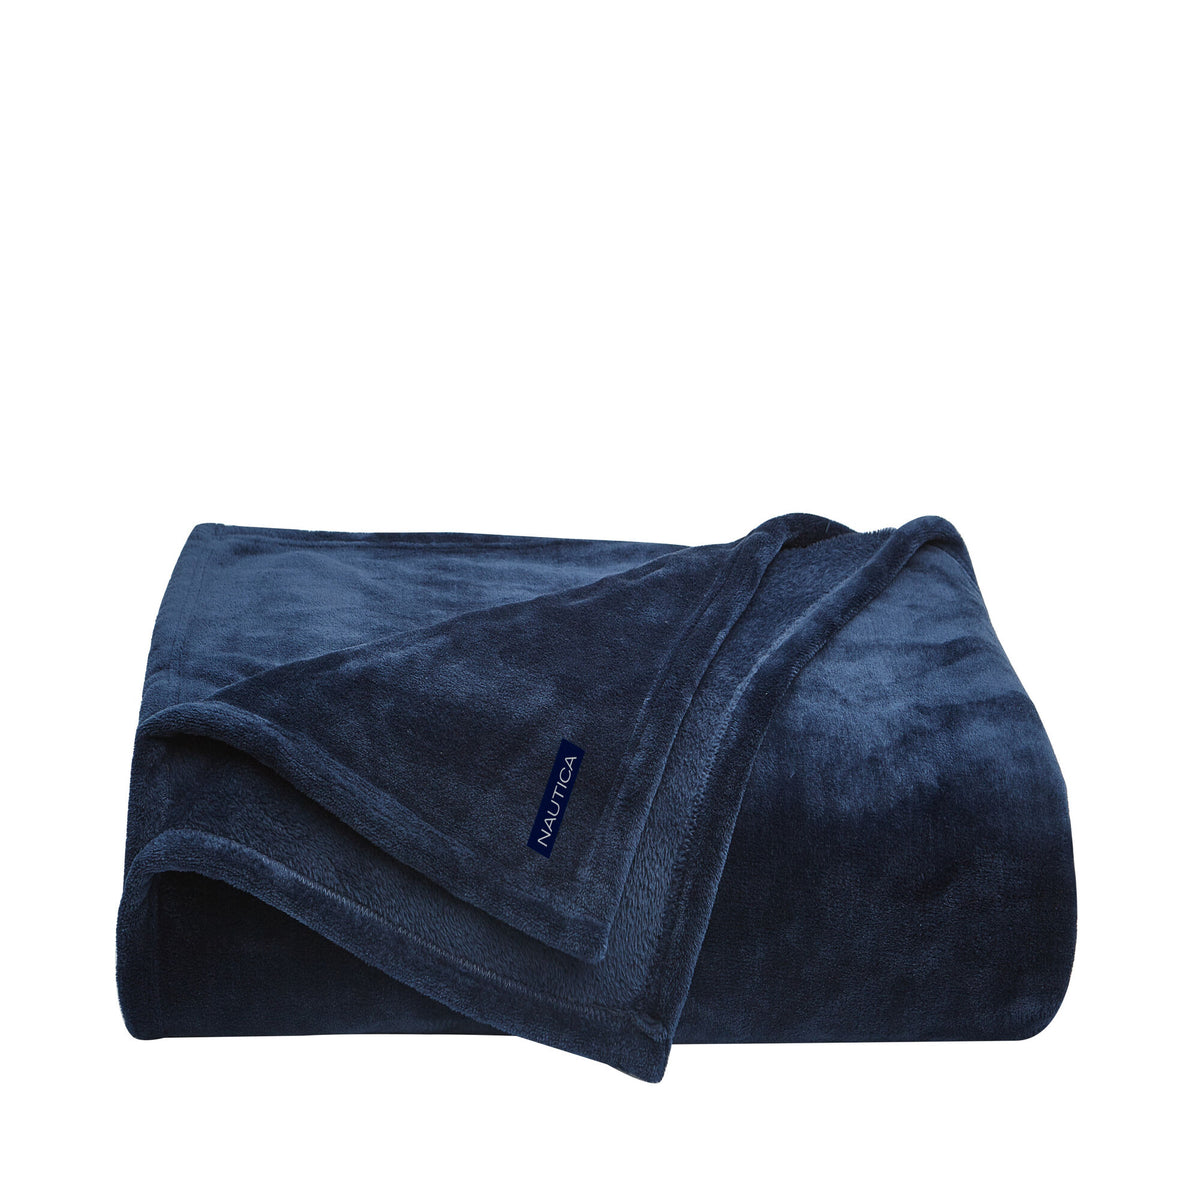 Nautica Solid Navy Ultra Plush Soft Full/queen Blanket Deep Dive Wash